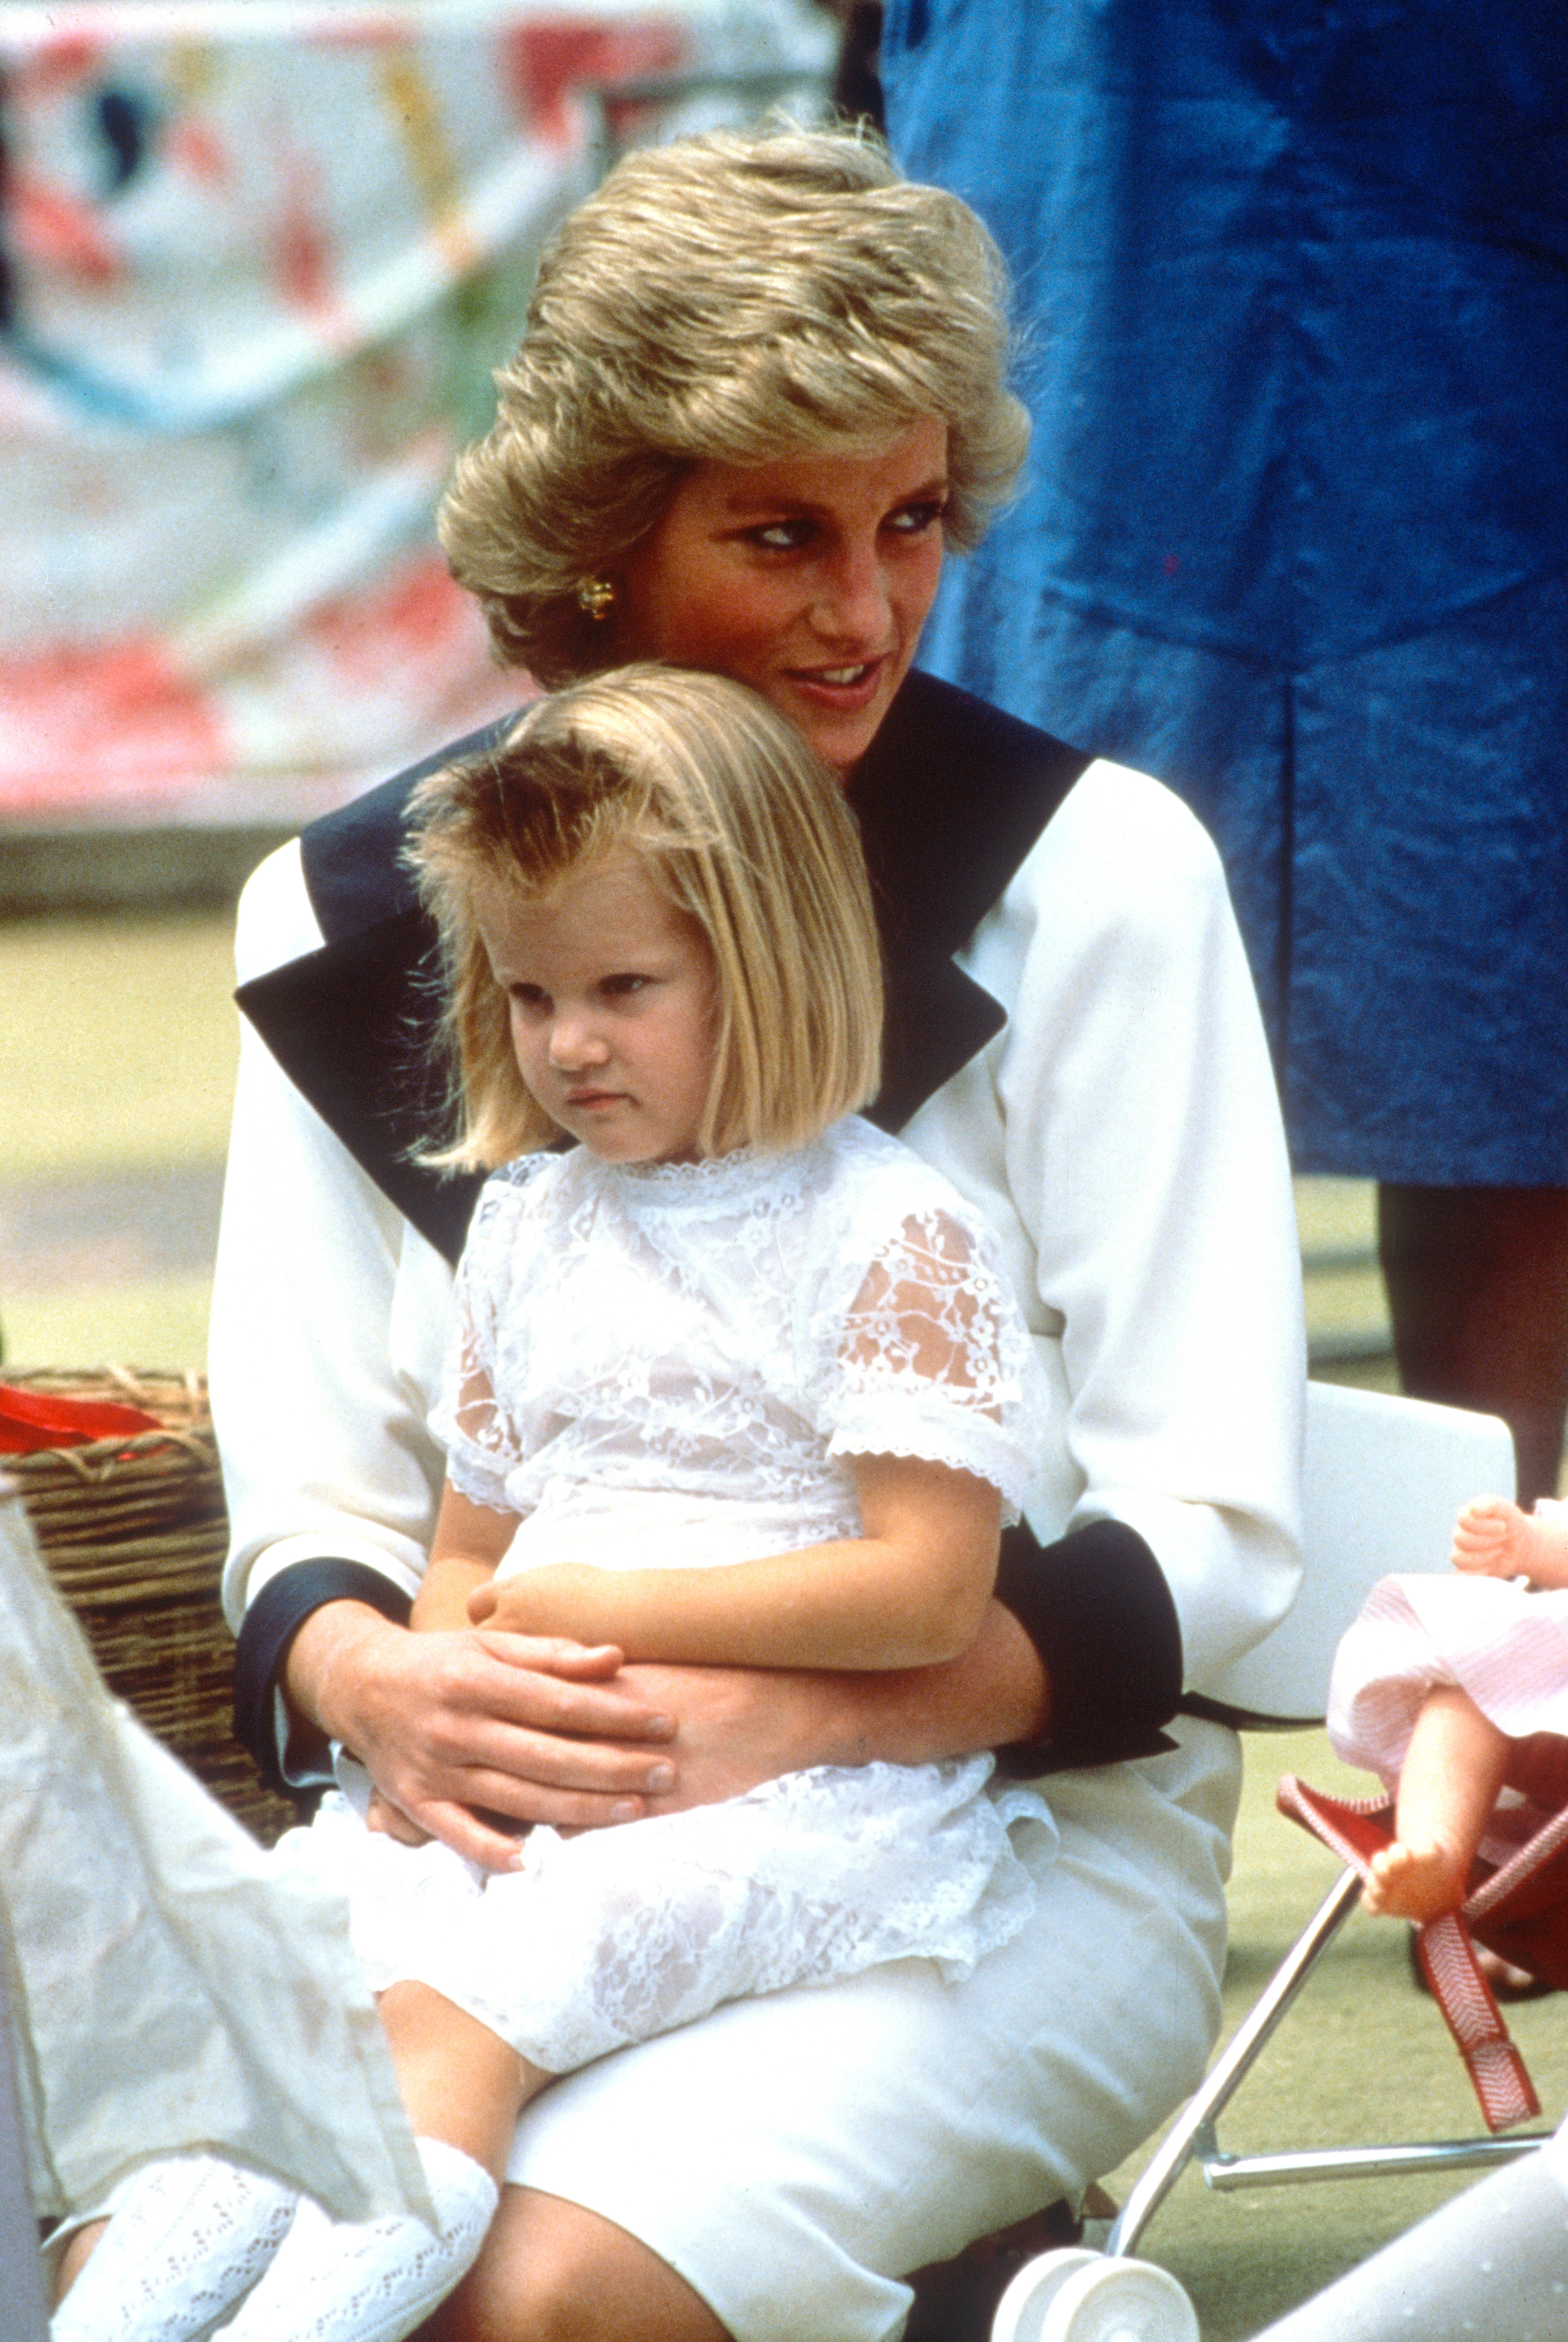 Diana, Princess of Wales, wearing a white dress with a navy blue collar designed by Catherine Walker, sits with a little girl on her lap during a visit to a Dr Barnardo's Home on February 2, 1988. | Source: Getty Images